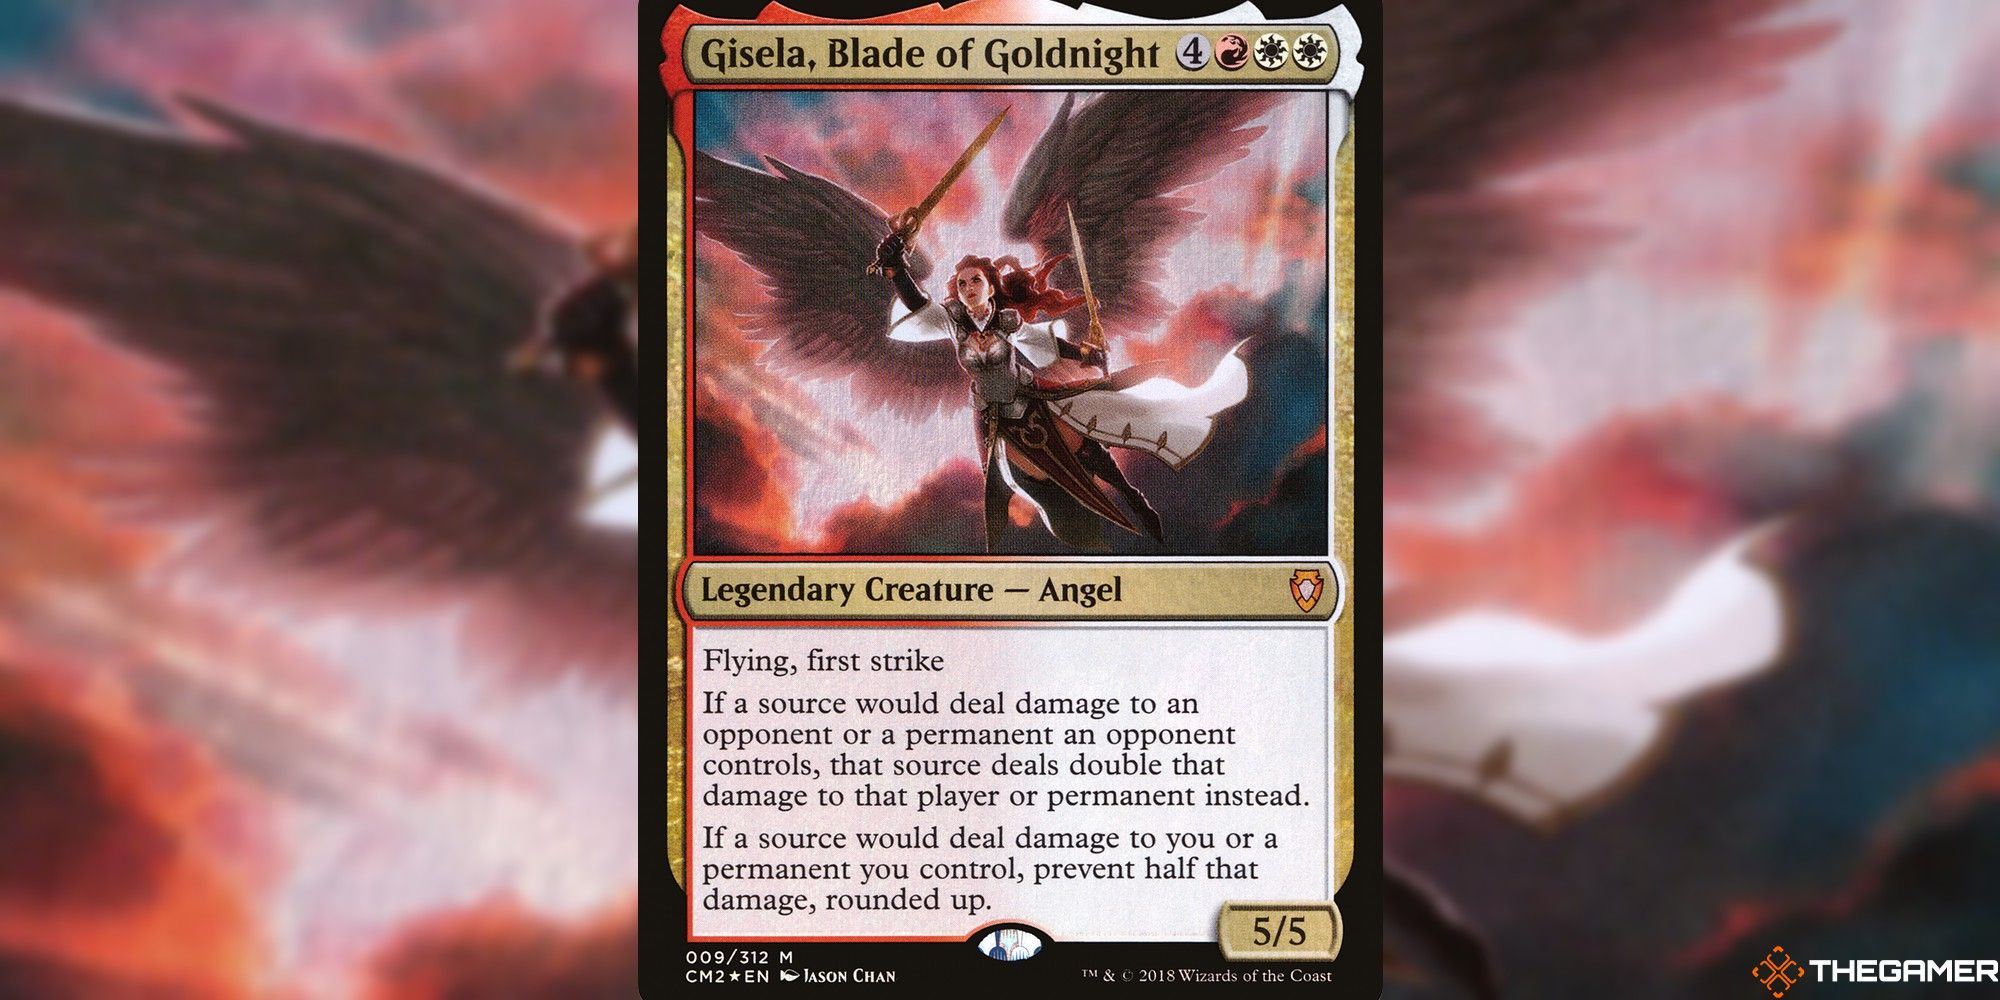 Image of the Gisela Blade of Goldnight card in Magic: The Gathering, with art by Jason Chan